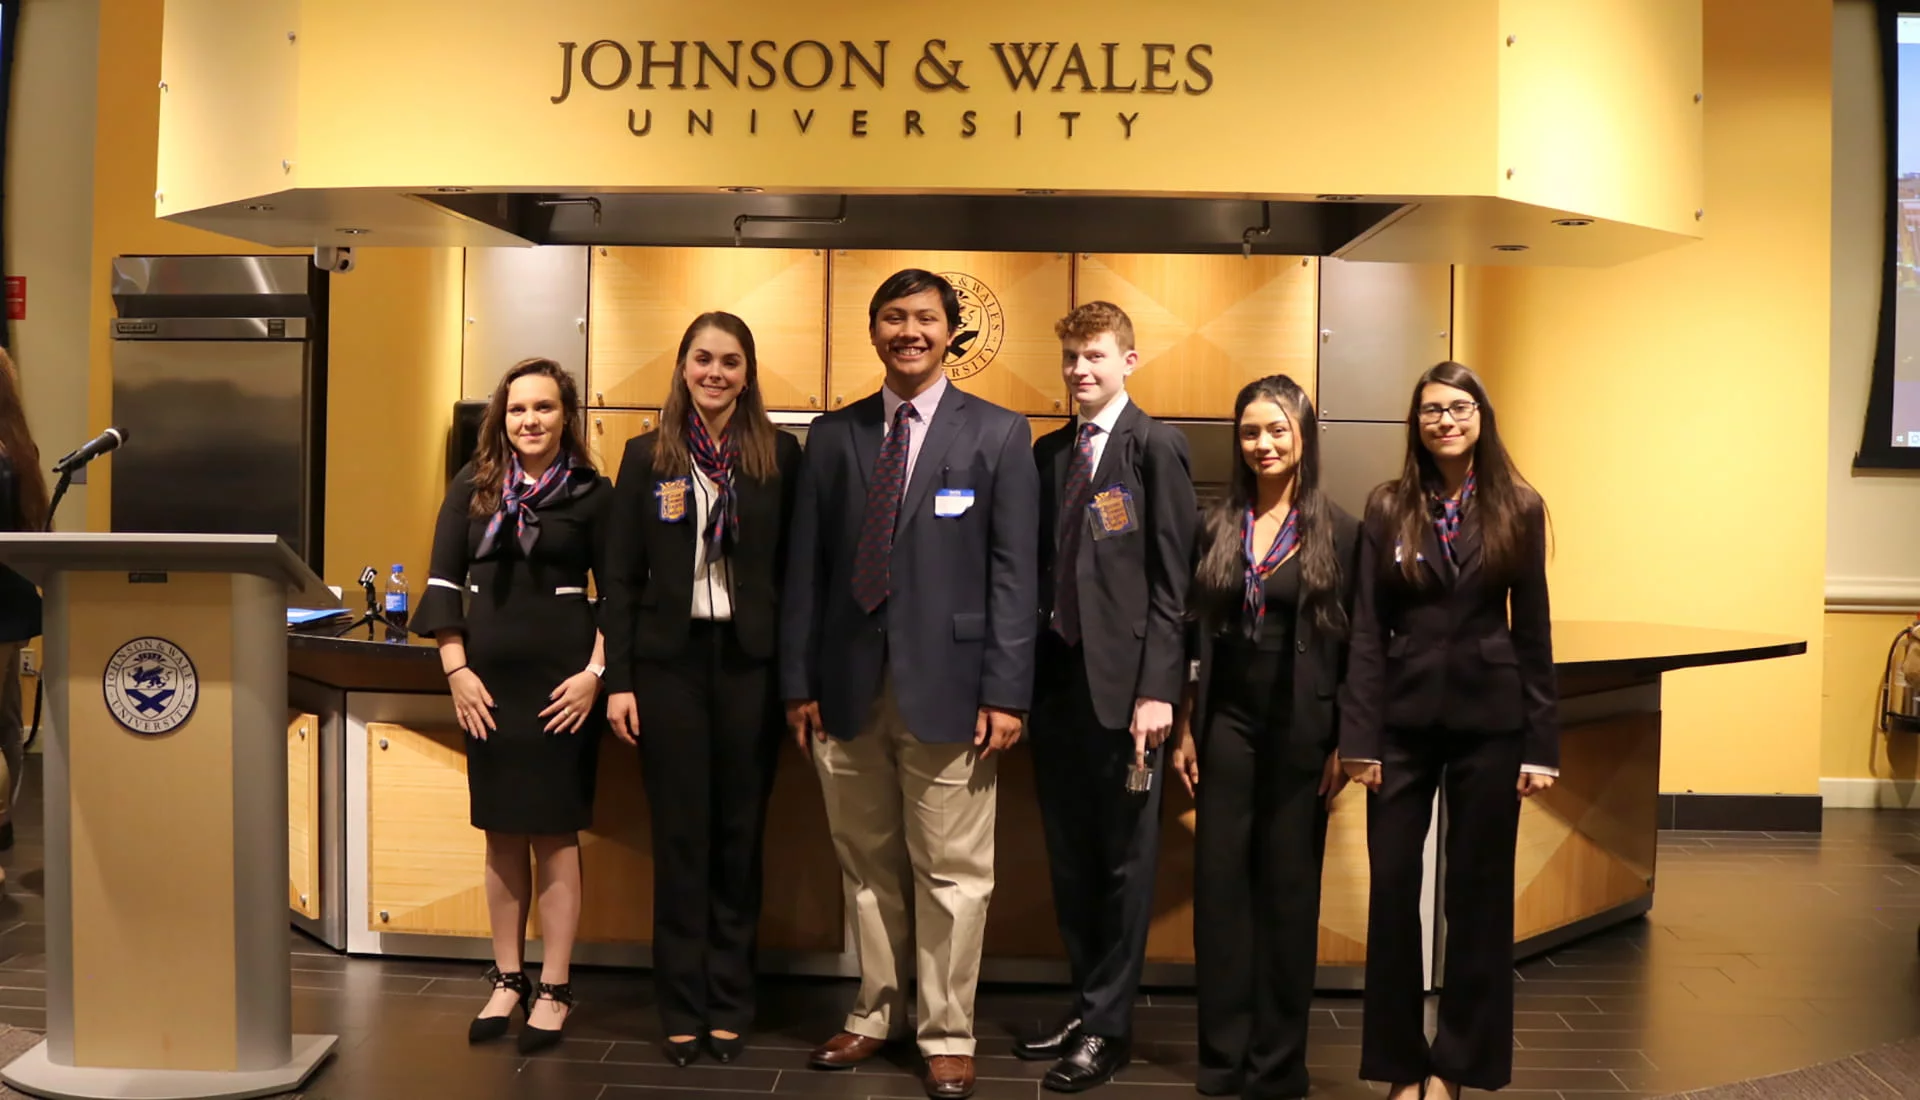 THE RI STATE OFFICERS (FROM LEFT TO RIGHT): NICOLE MEDEIROS, PRESIDENT; JESSICA CATERSON, VICE PRESIDENT; FRED BEBE, SECRETARY; JASON PAGE, TREASURER; HOLLY VIPHAKONE, REPORTER ; ARI DULCHINOS, WEBMASTER.